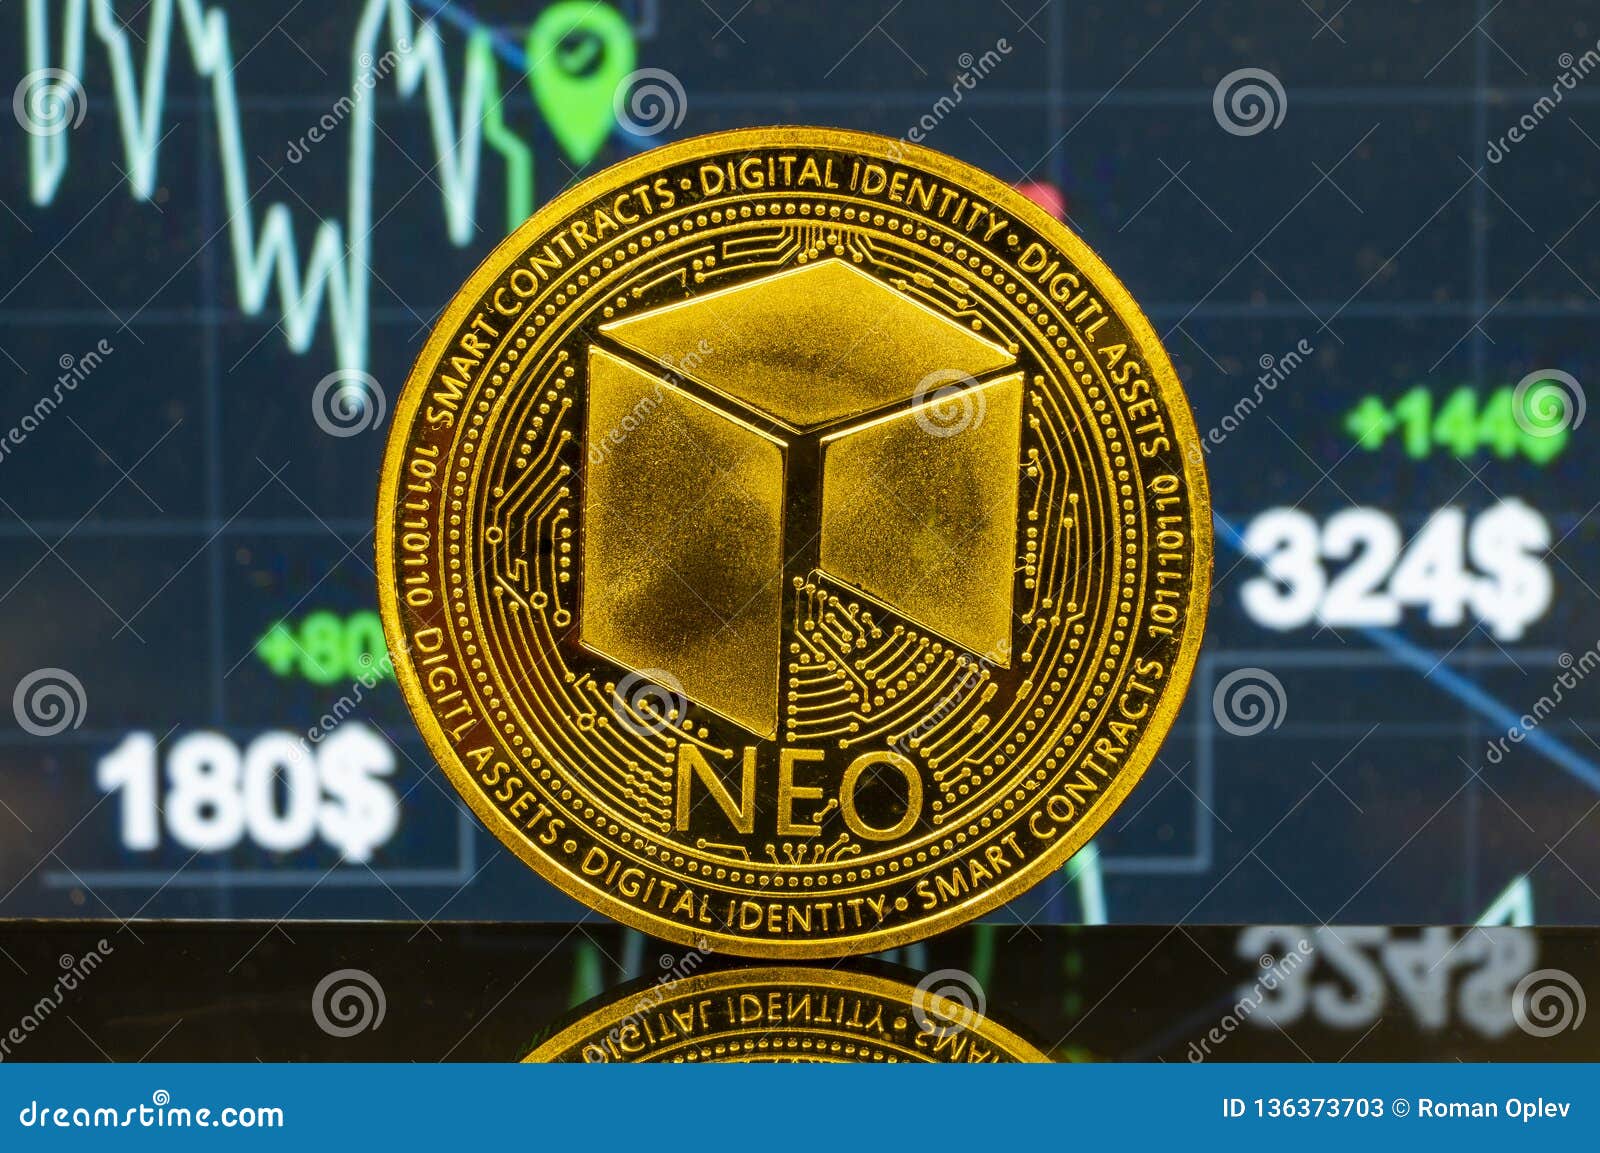 n1 crypto currency